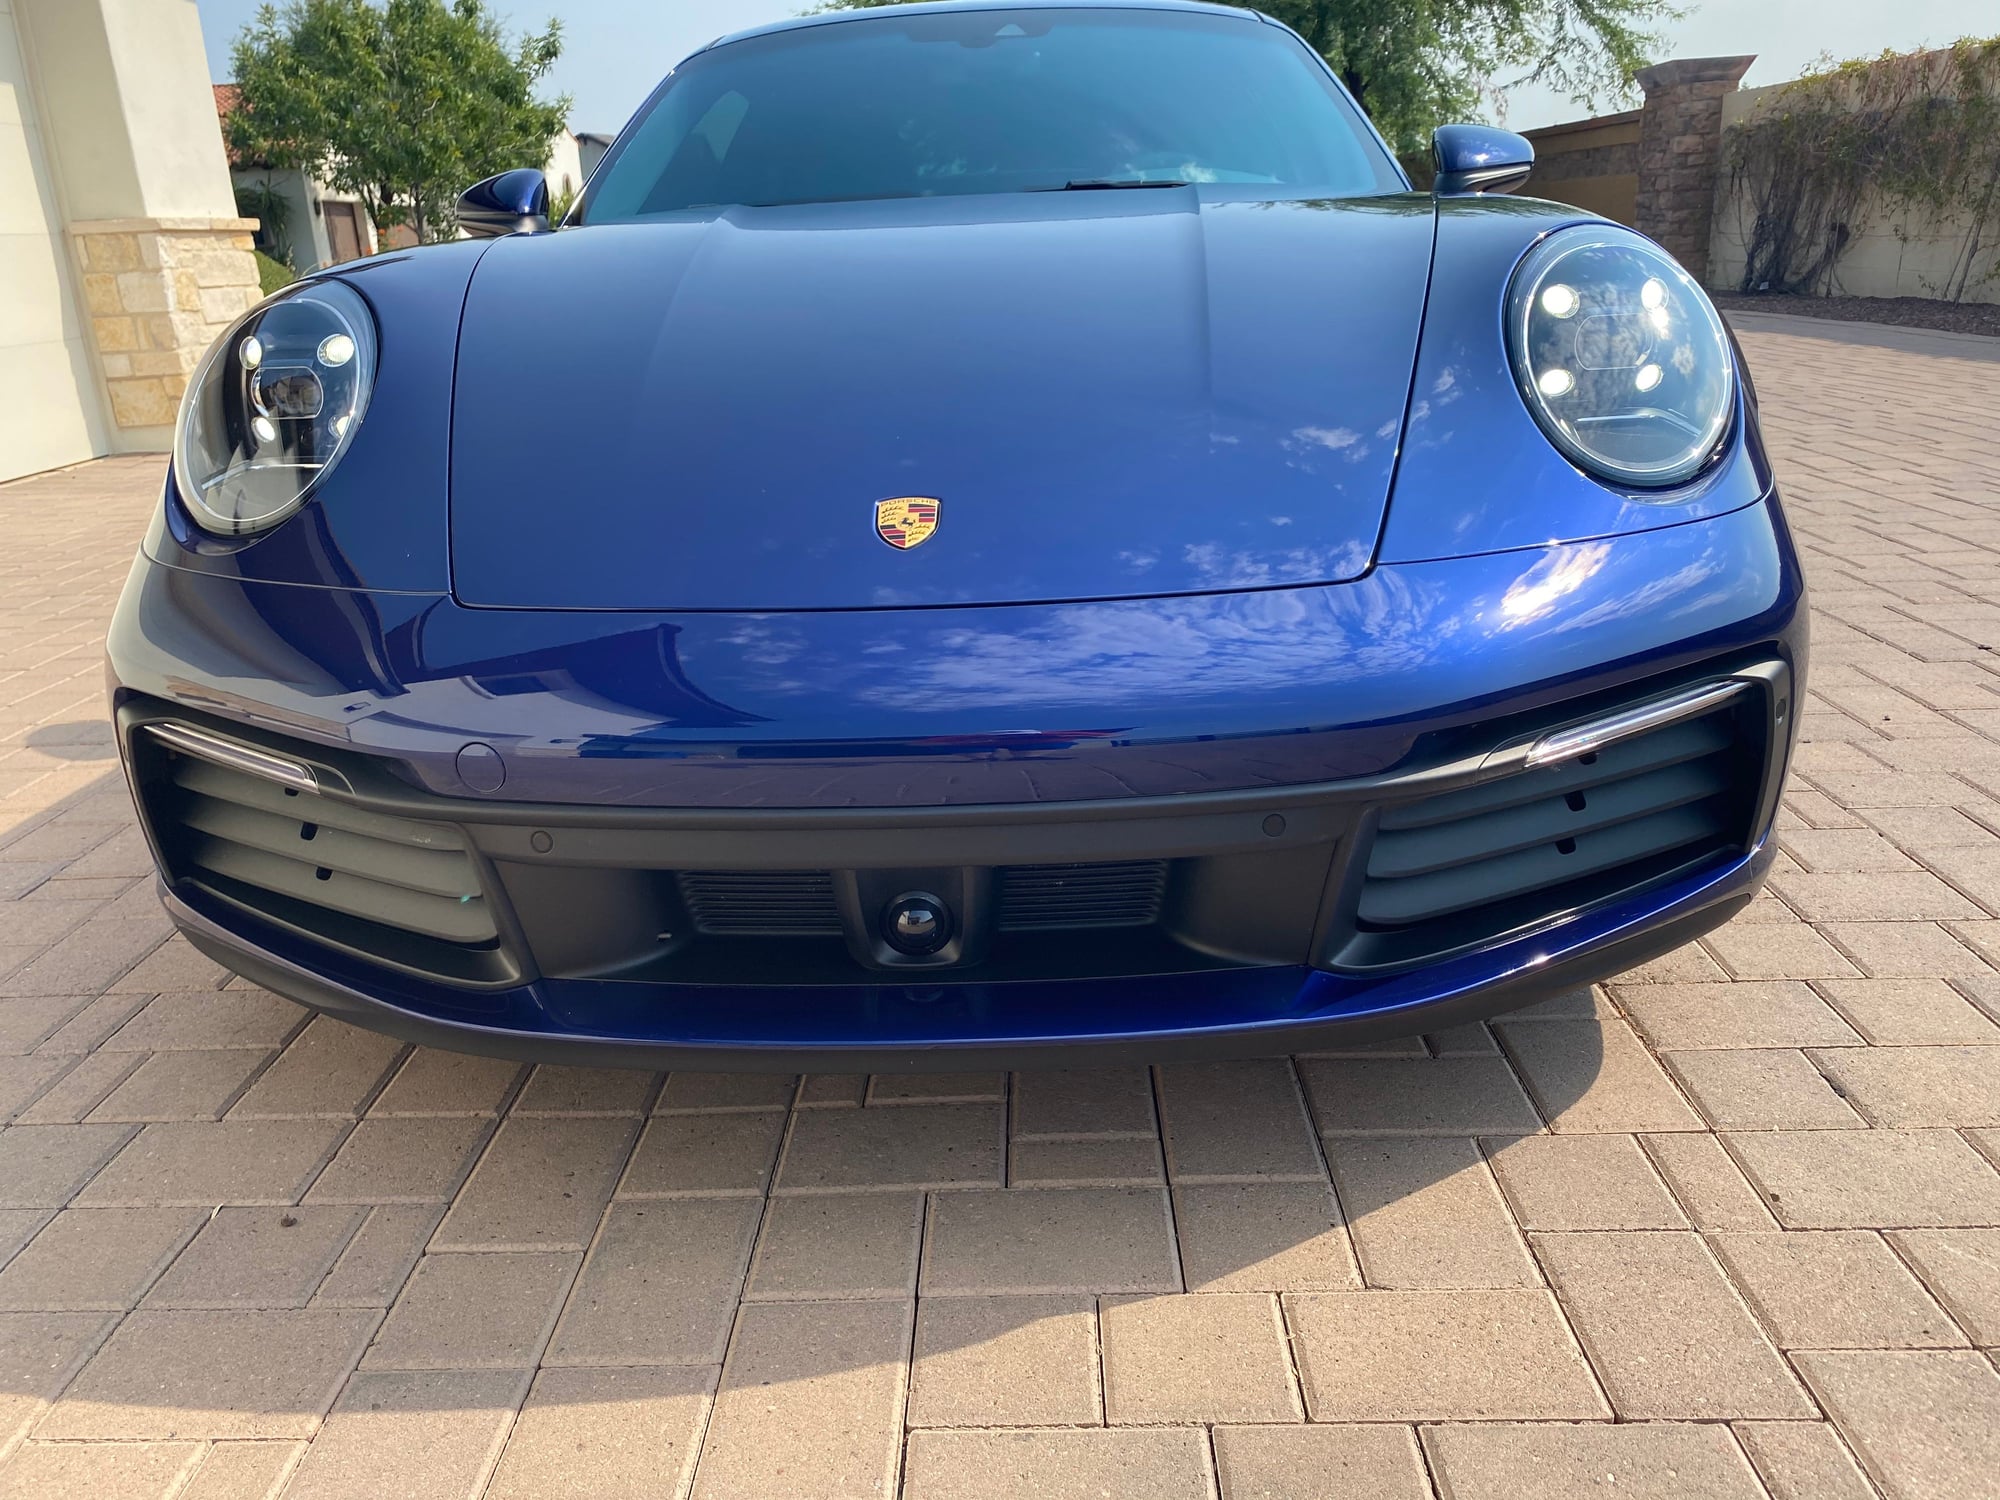 2020 Porsche 911 - 2020 992 Base Carrera Gentian Blue - Used - VIN WP0AA2A99LS205173 - 7,500 Miles - 6 cyl - 2WD - Automatic - Coupe - Blue - Gilbert, AZ 85297, United States